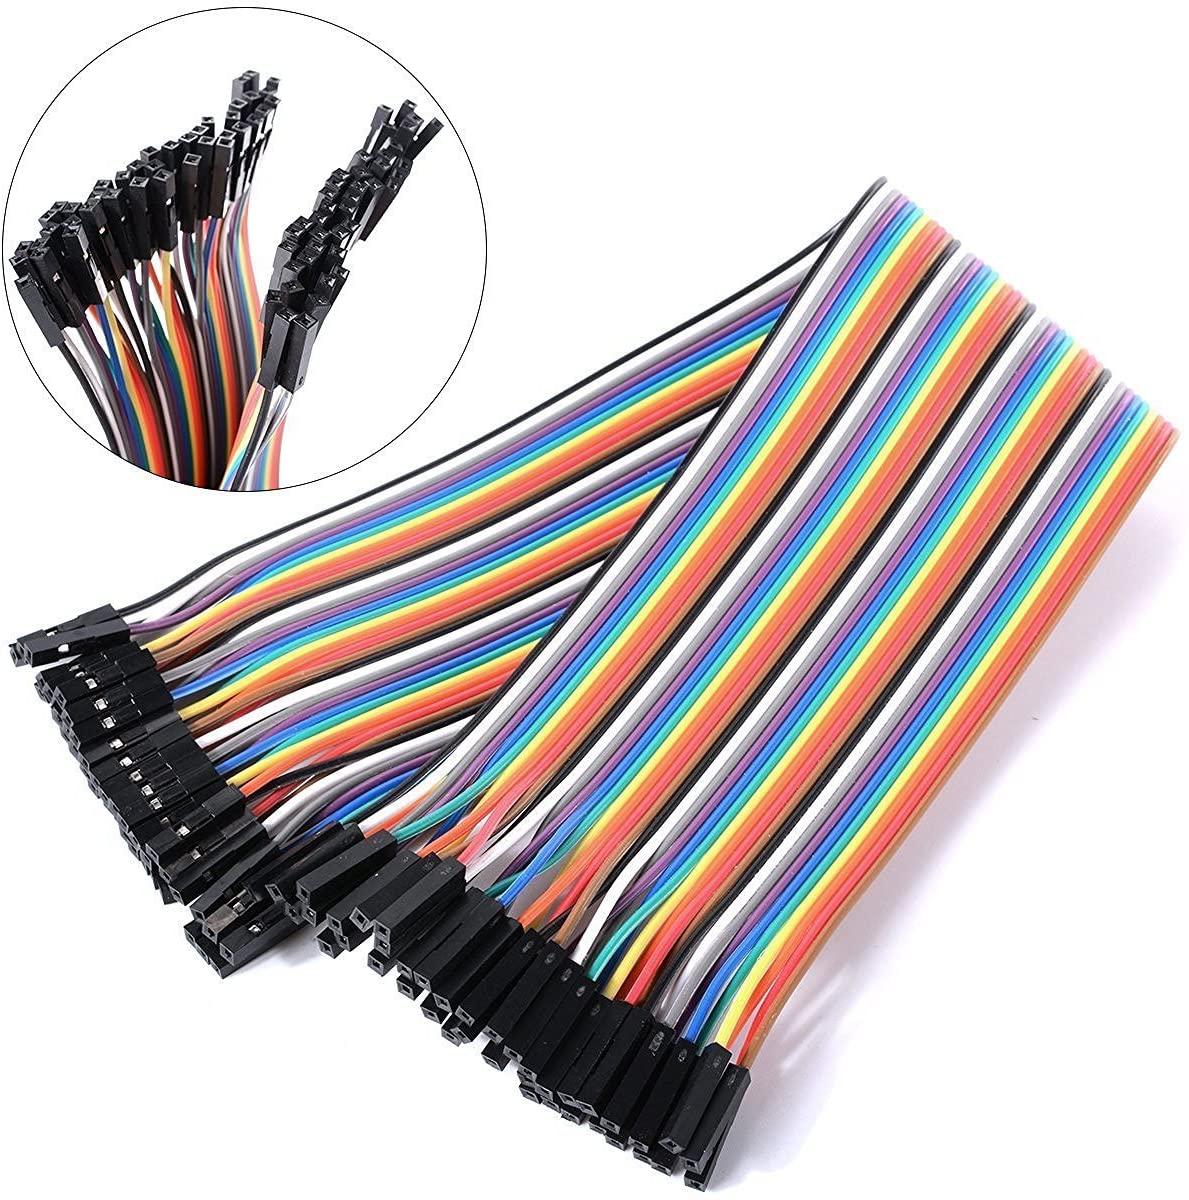 40Pin 20cm DuPont 1P-1P Wire Jumper Cables Socket to Socket Female-Female  (F-F)